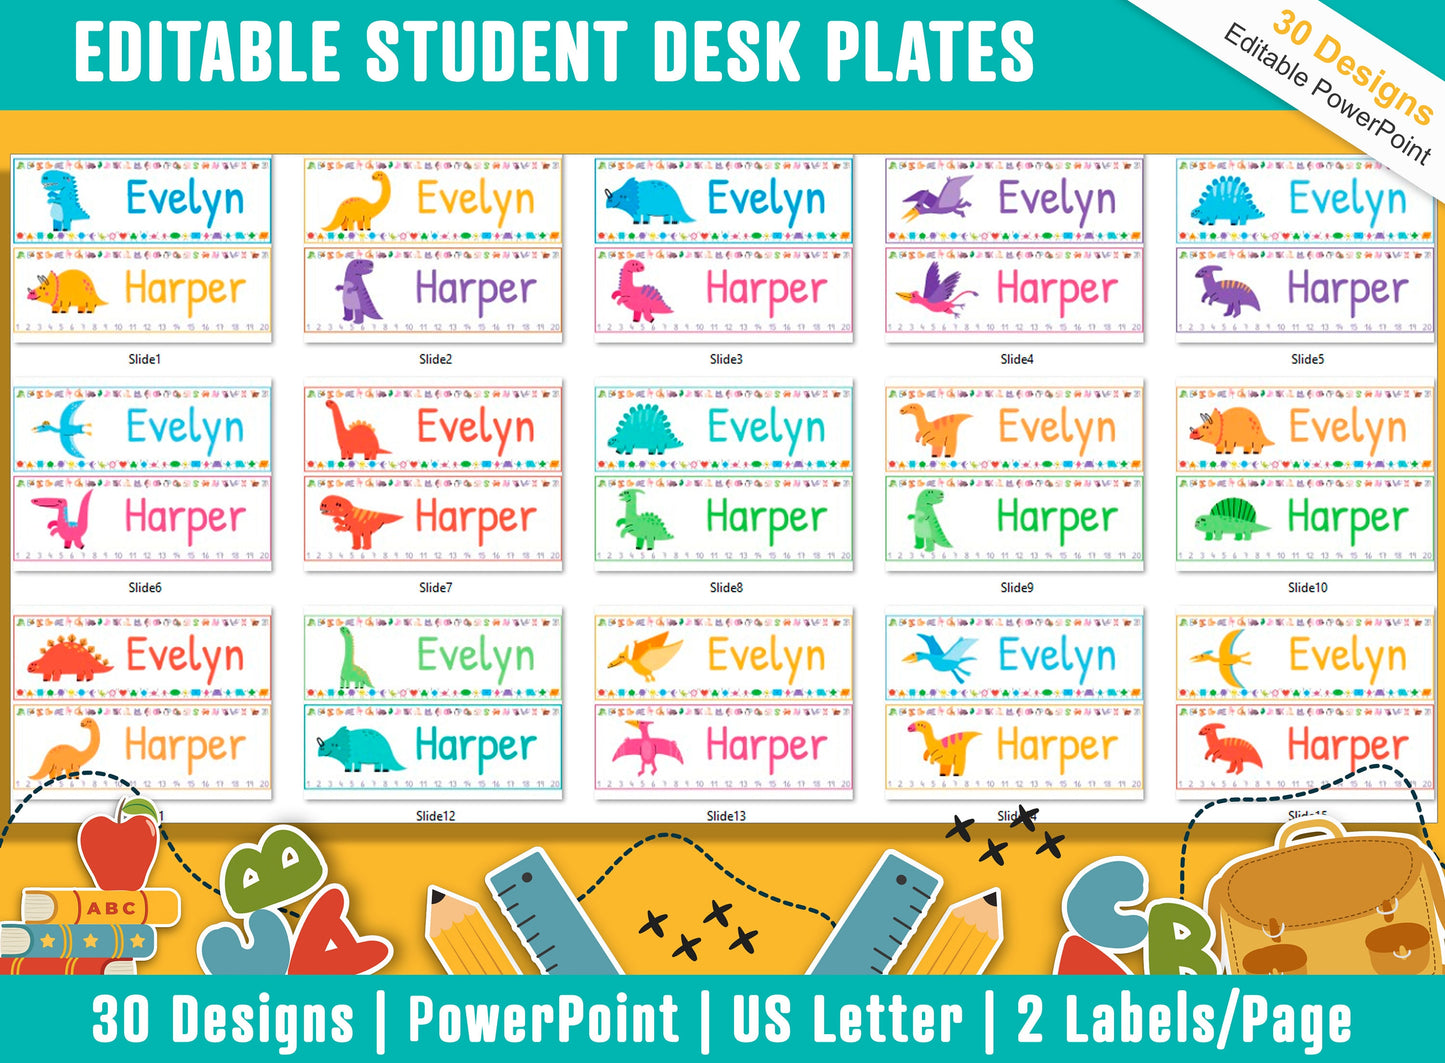 Baby Dinosaur Student Desk Plates: 30 Editable Designs with PowerPoint, US Letter Size, Instant Download